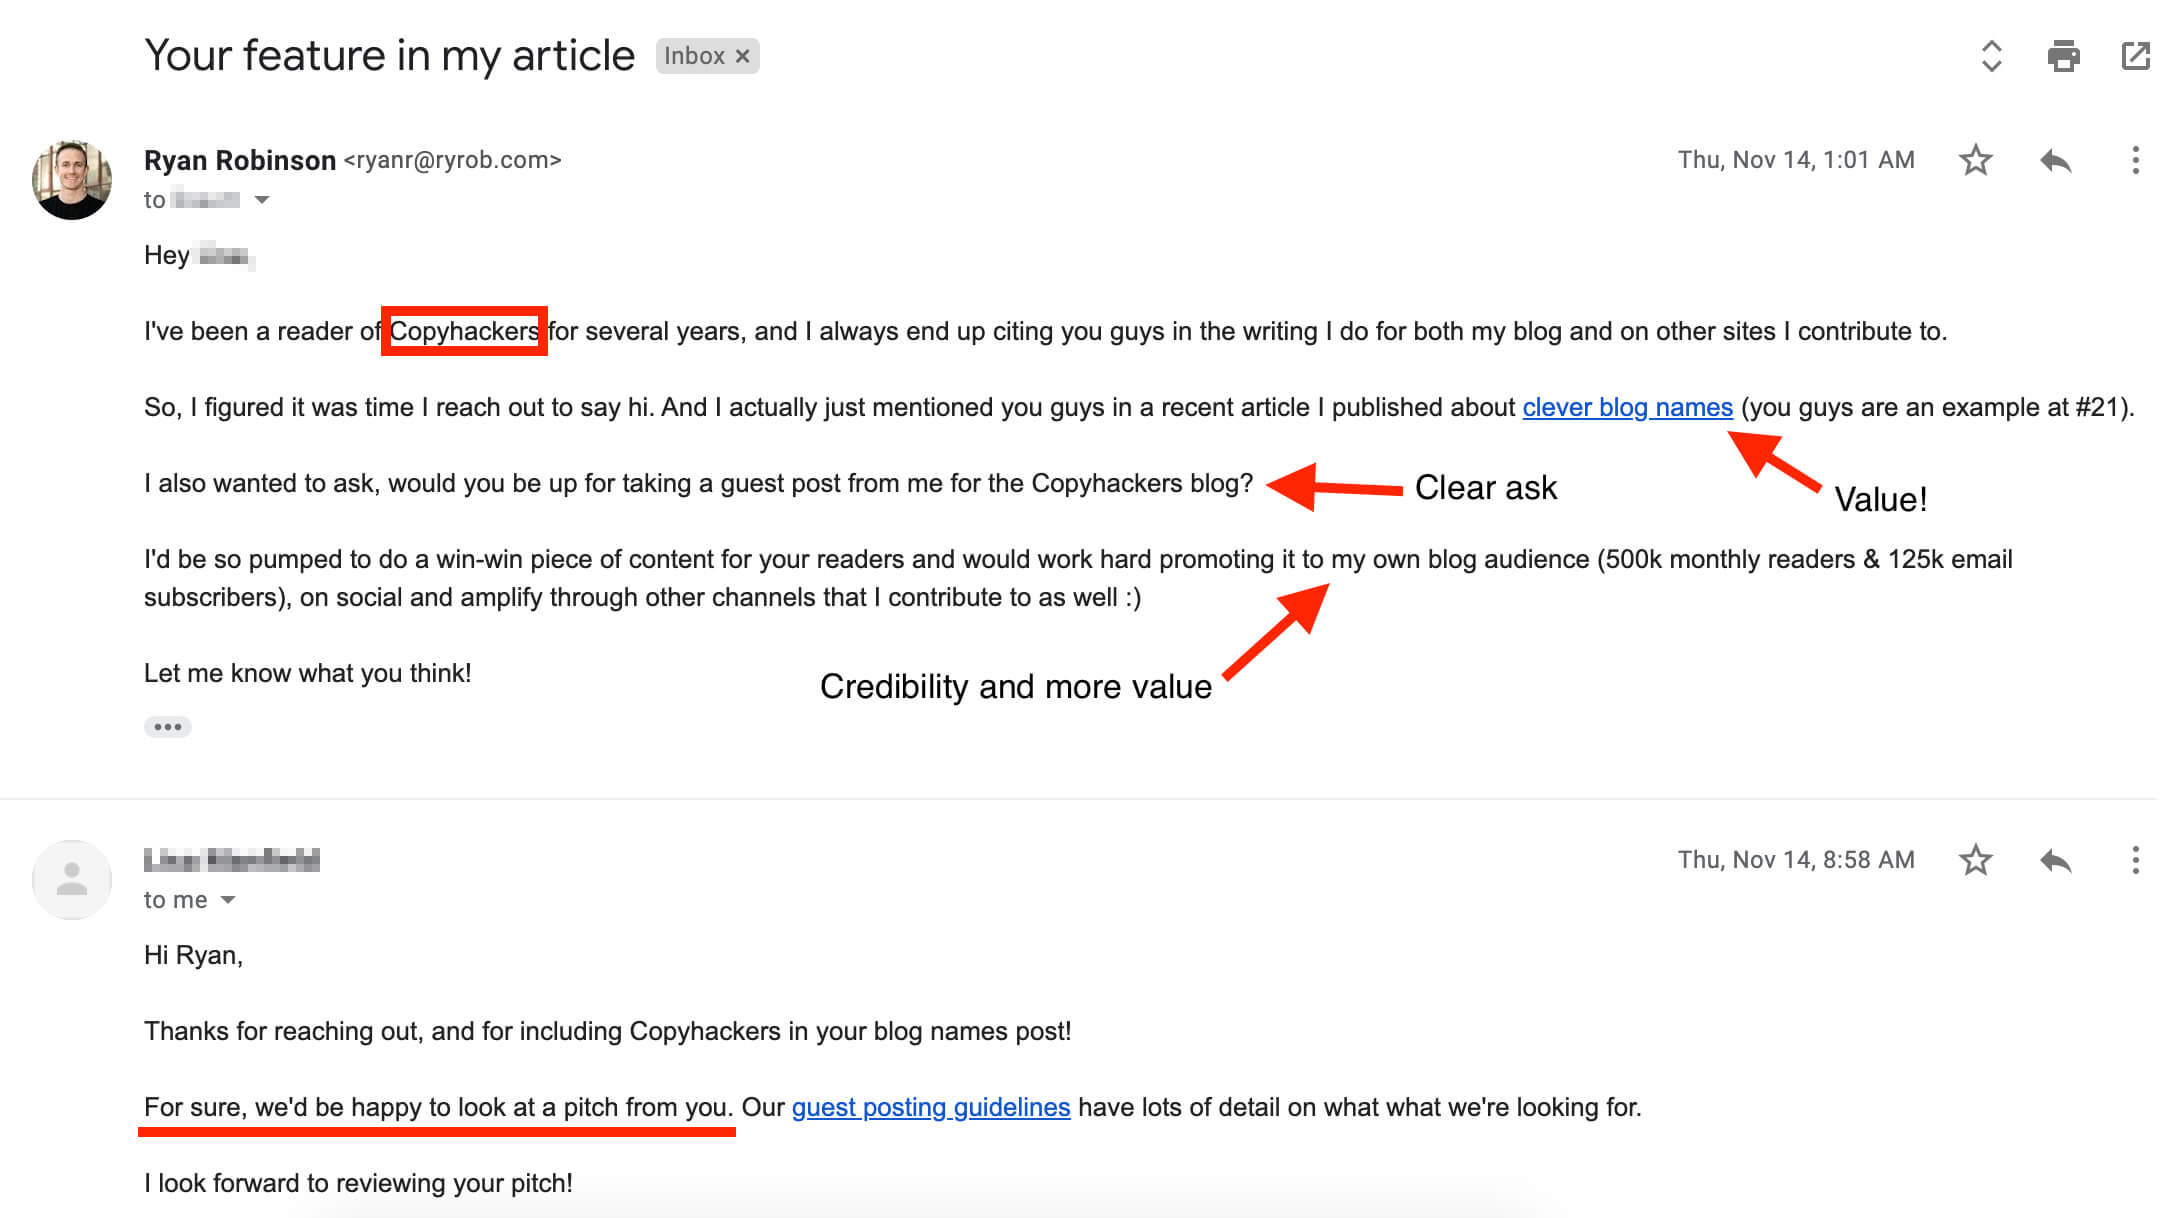 Copyhackers blog outreach email template example and screenshot